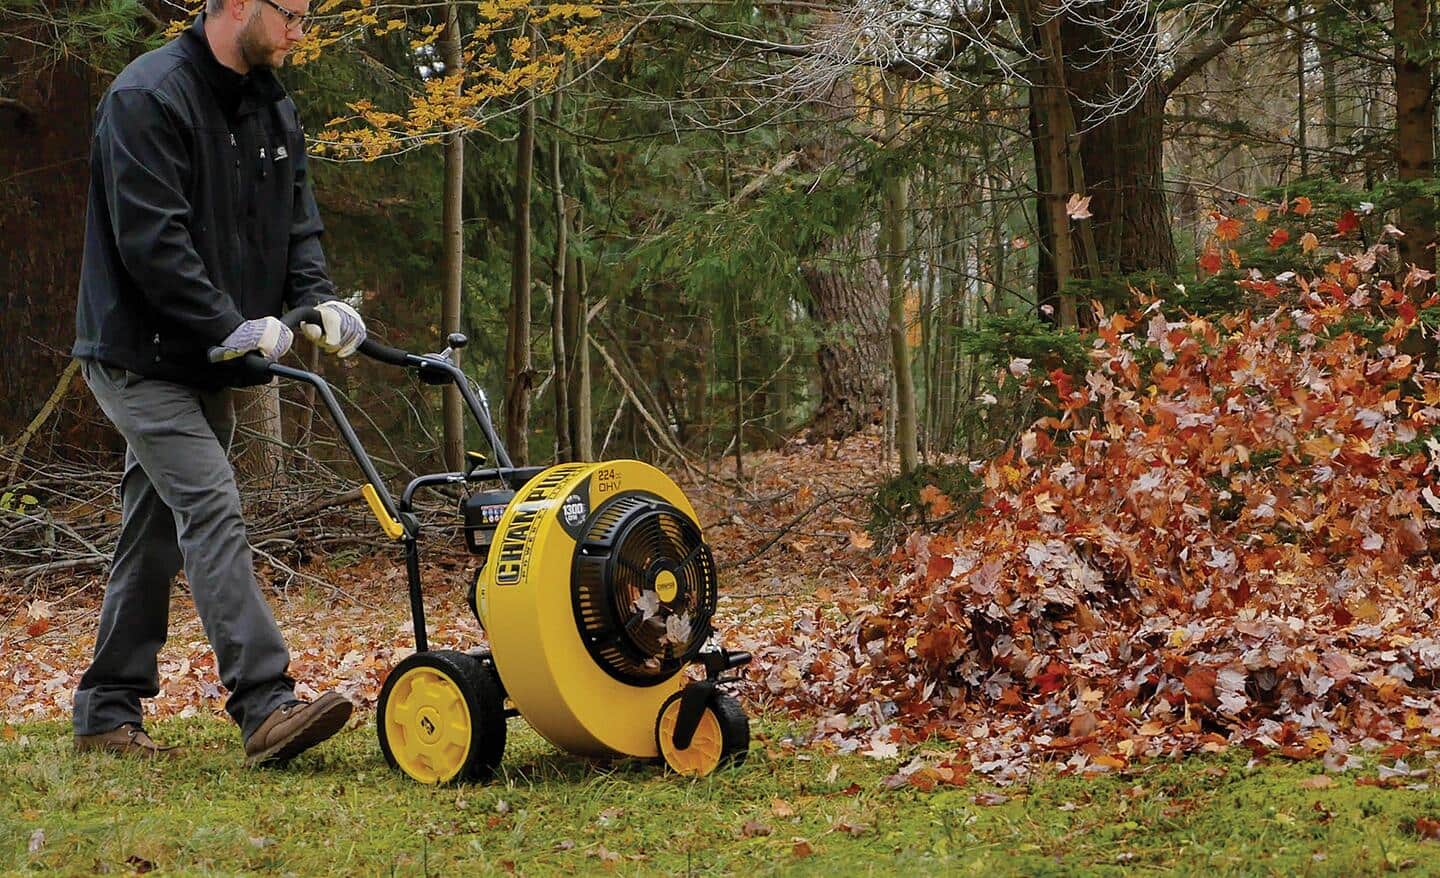 Get a leaf blower if leaves are leaving you bushed?